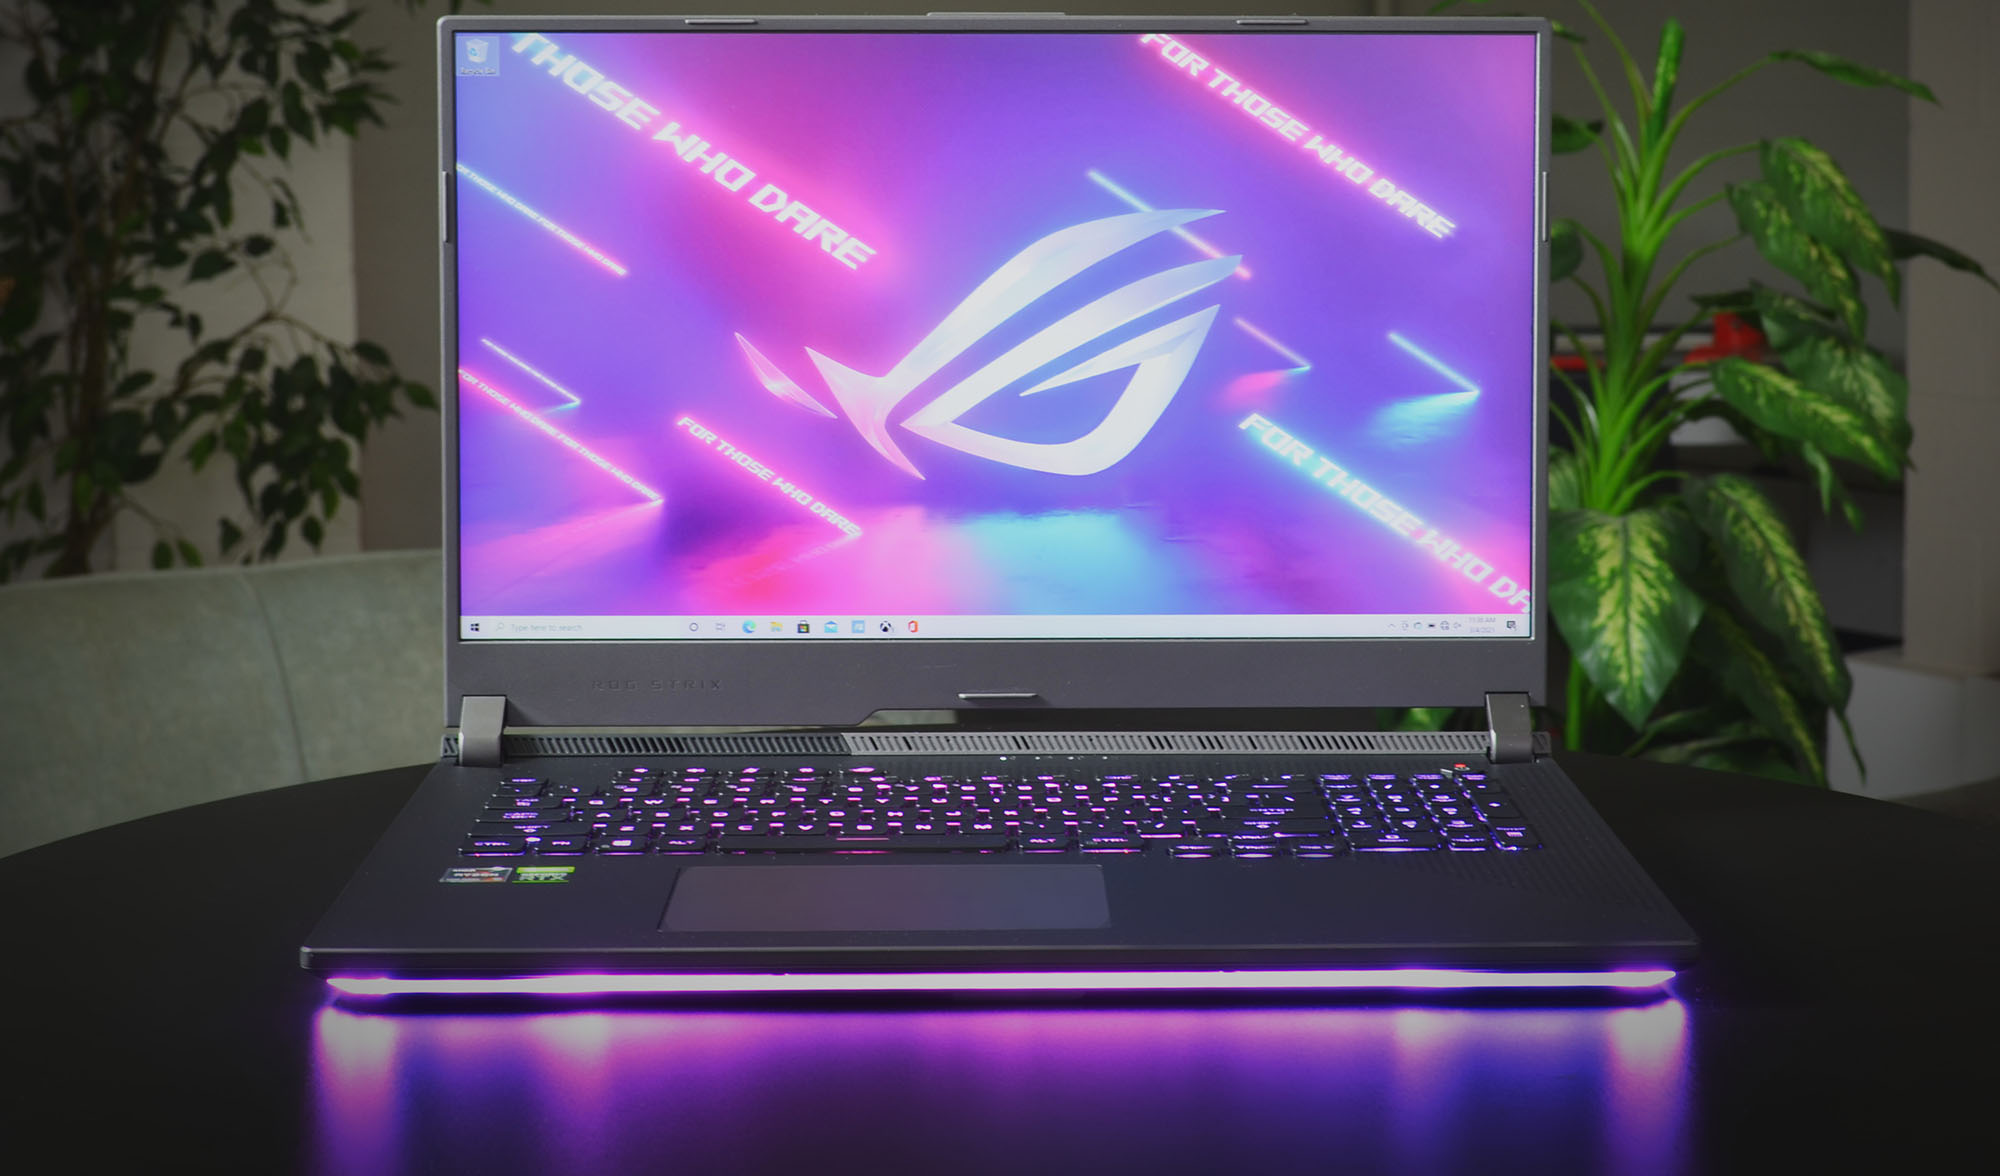 Handson The ROG Strix G17 has the hustle for any game ROG